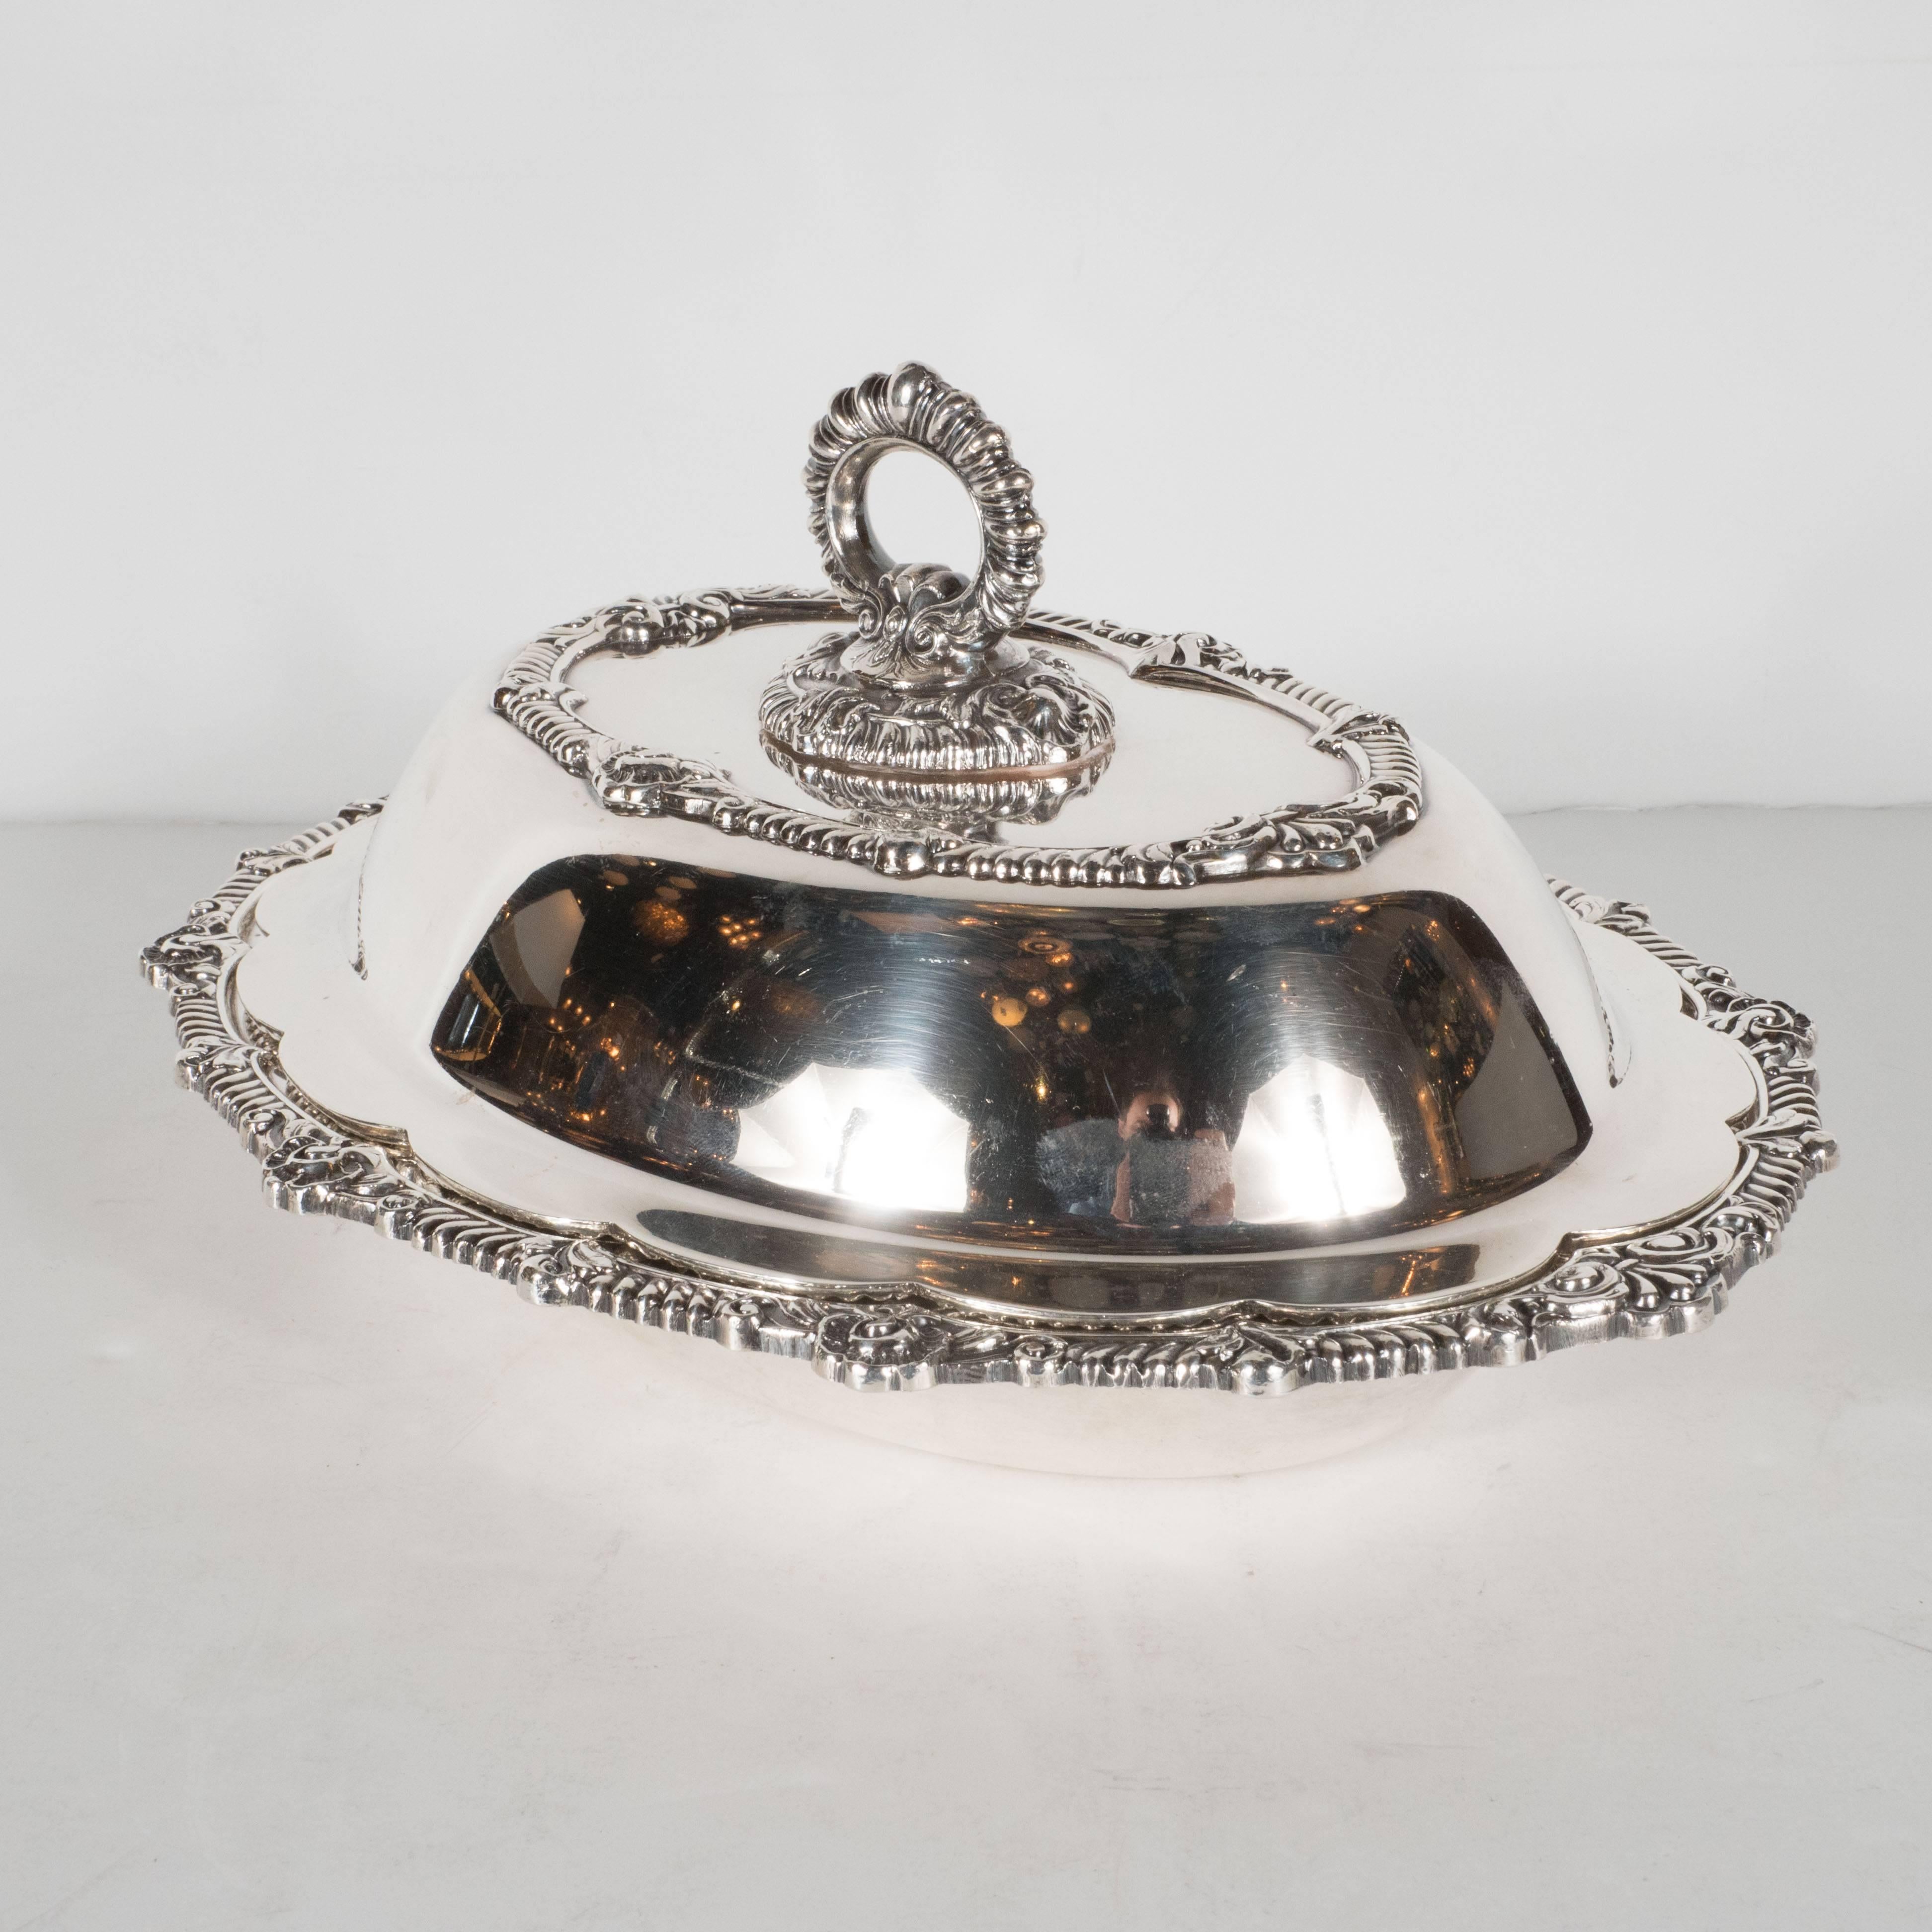 This stately sterling silver plated tureen features a reeded handle, scalloped edges with Baroque details, including fleur de lys throughout. The lid features a reeded ovular handle and a raised based with intricate Baroque designs. The tureen comes